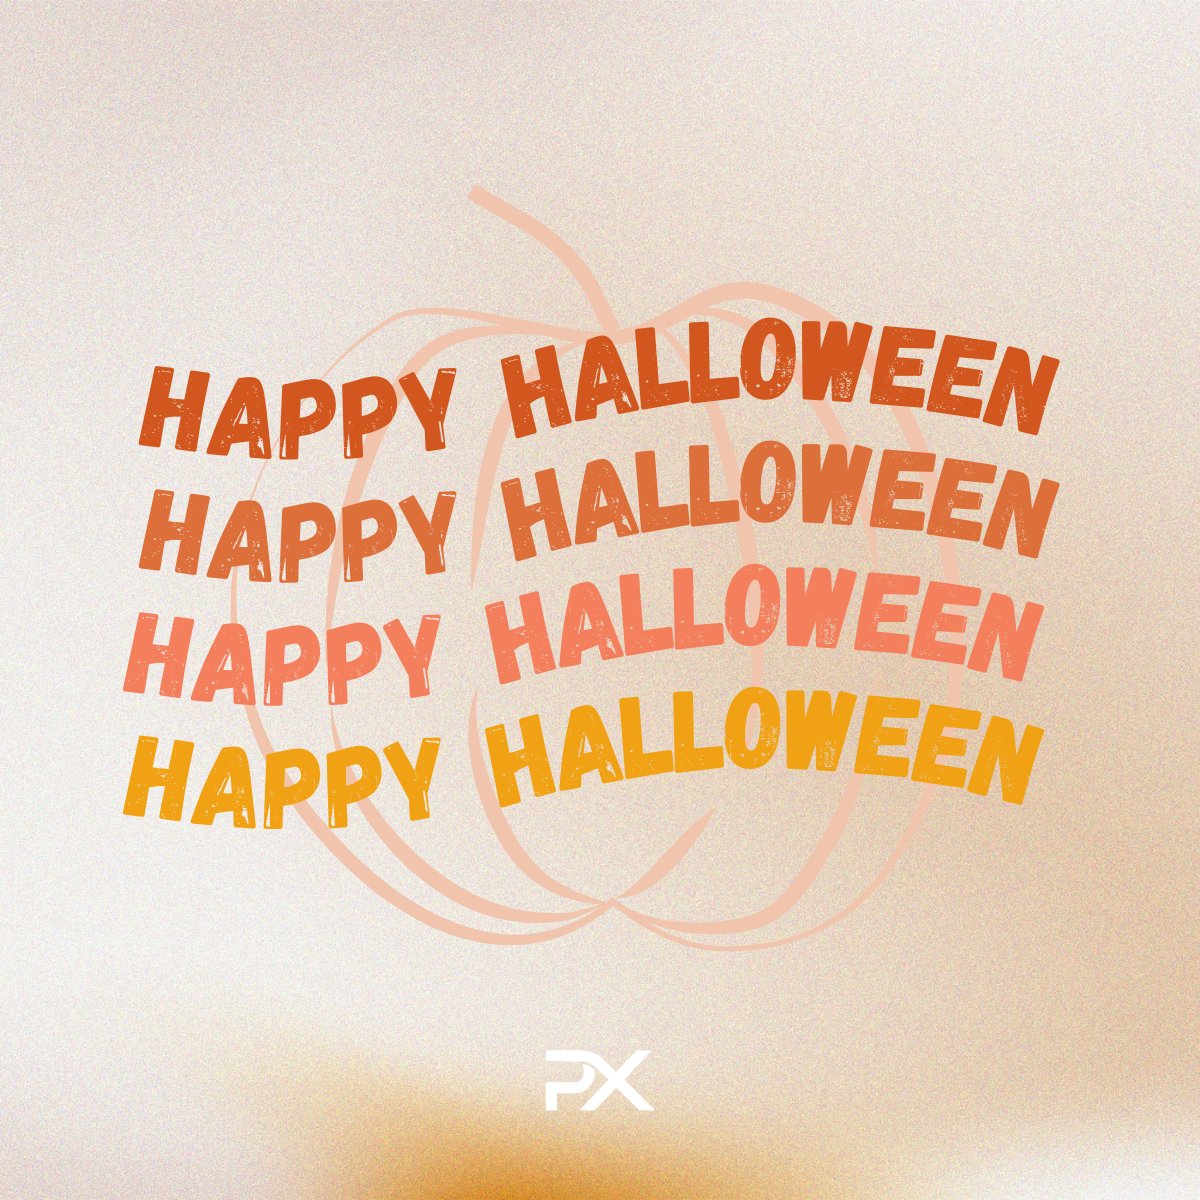 Have a spooky awesome day!